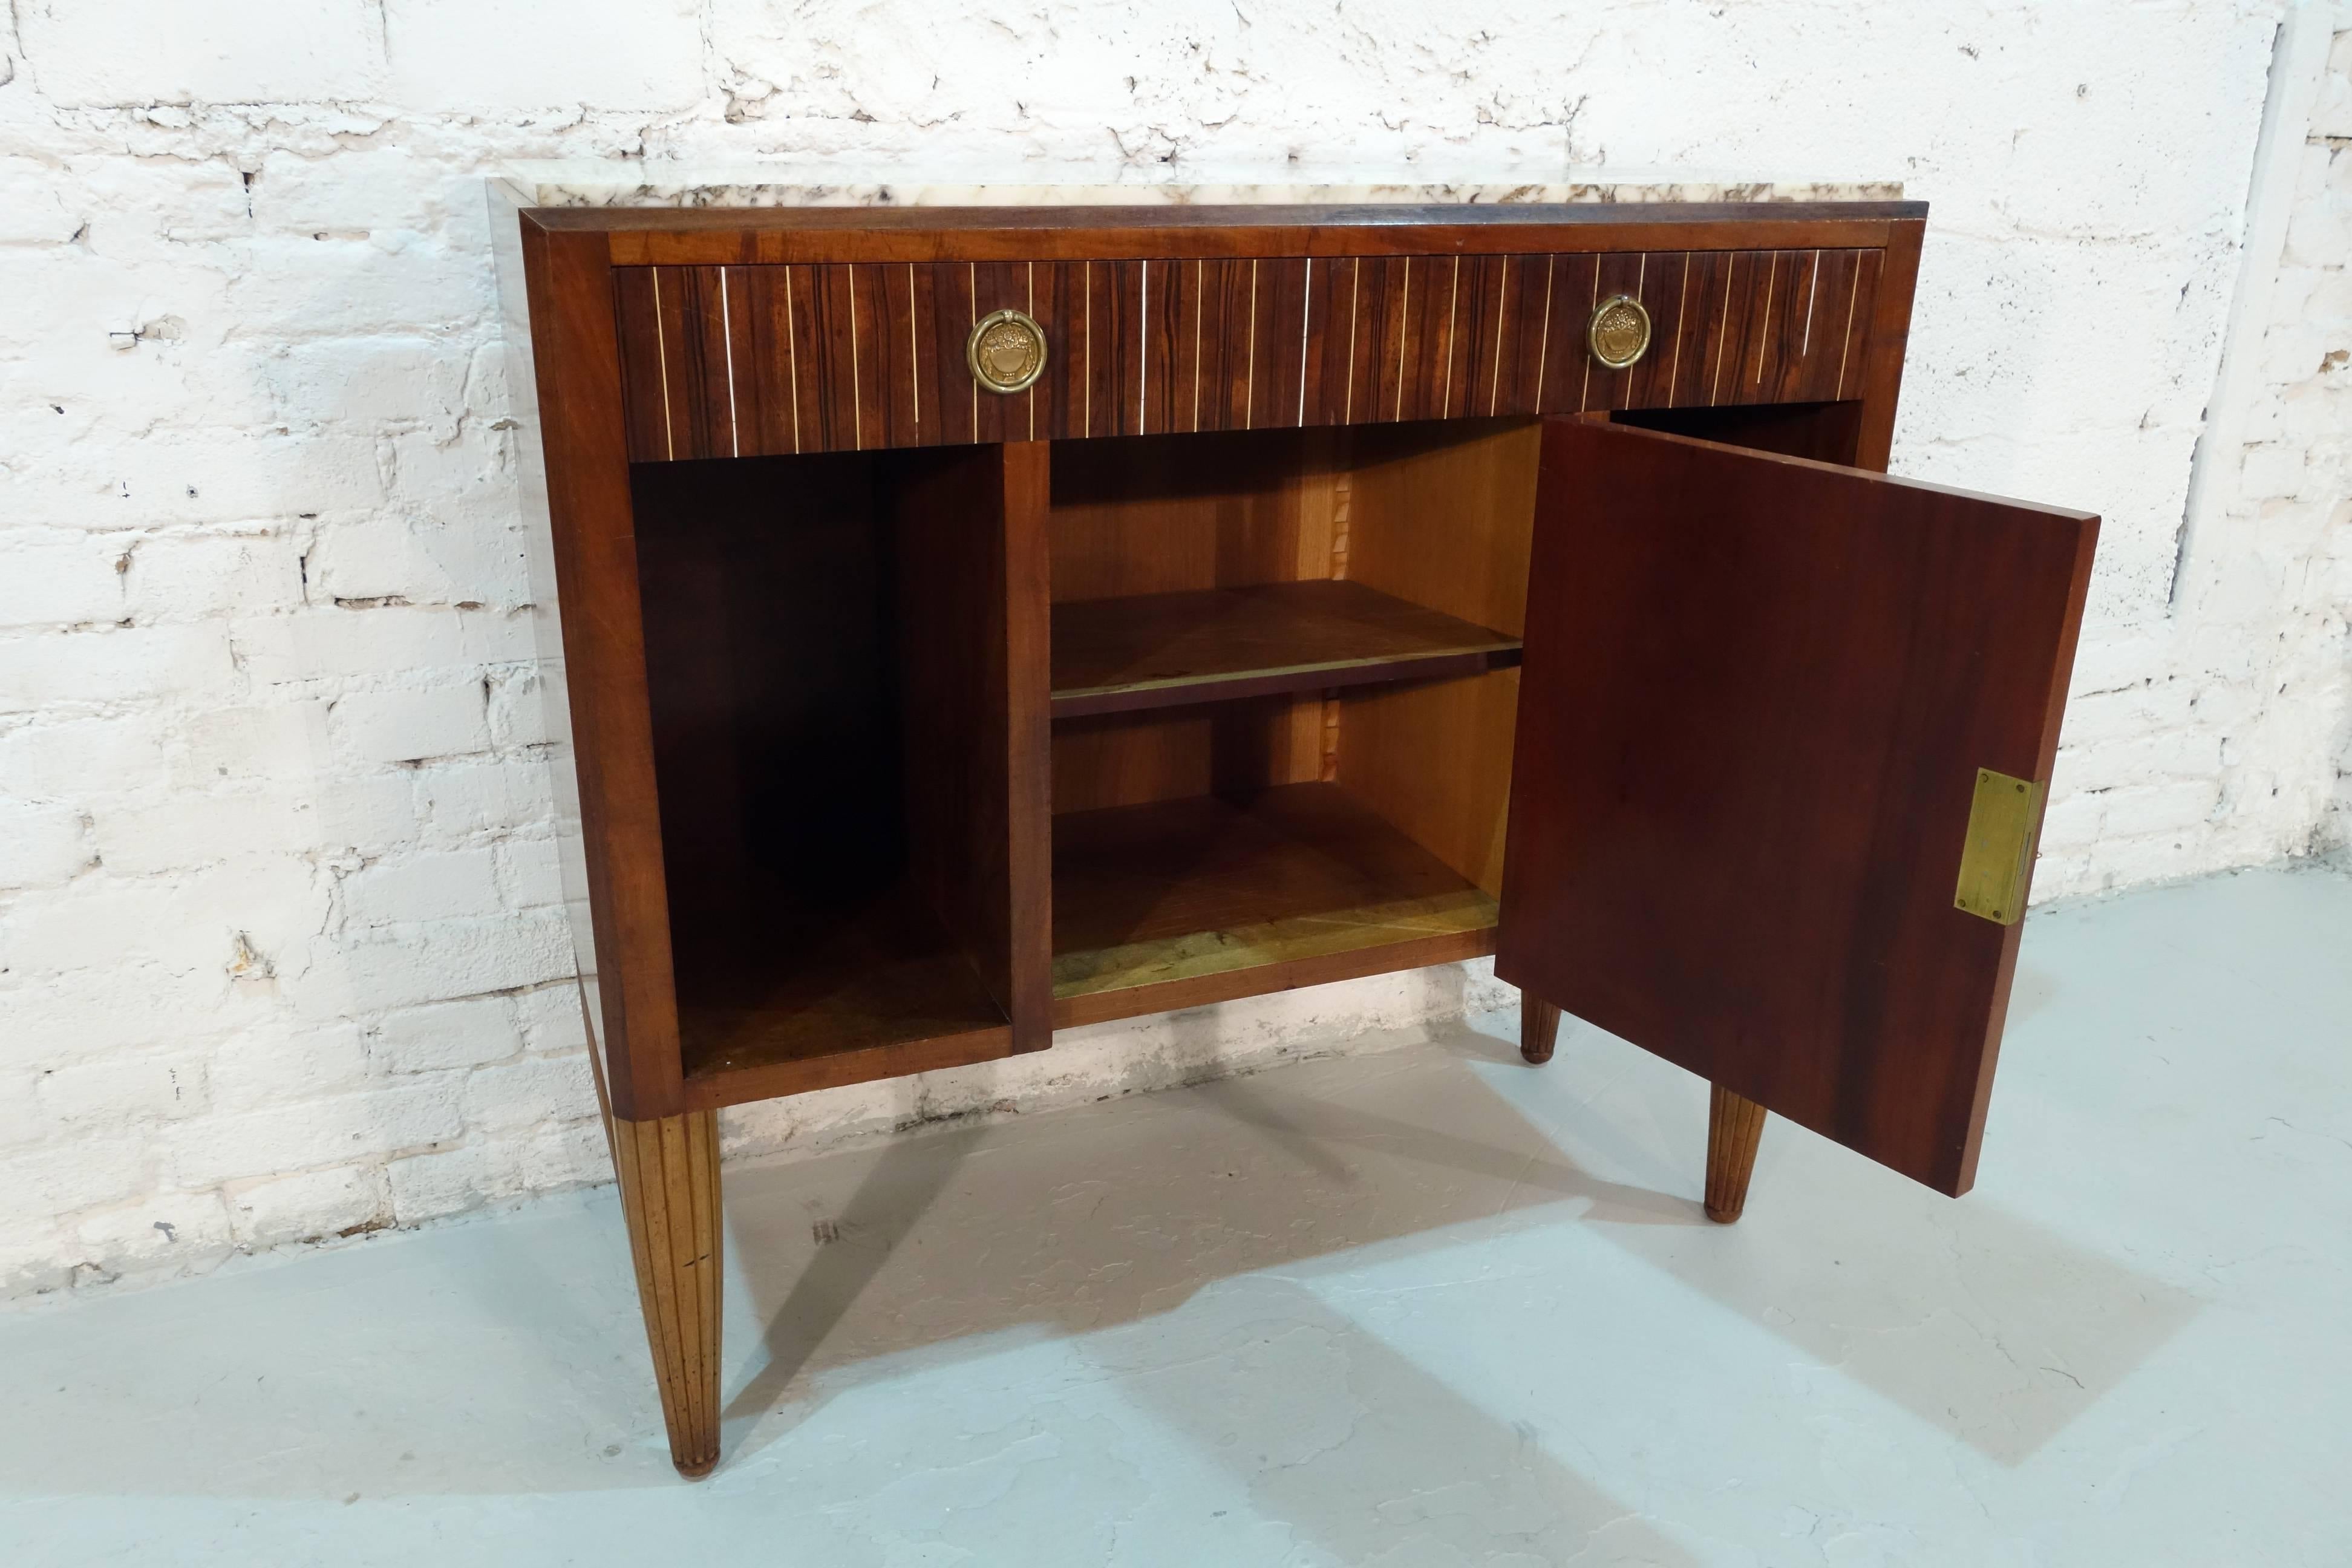 Mahogany Signed French Art Deco Dresser by Roche